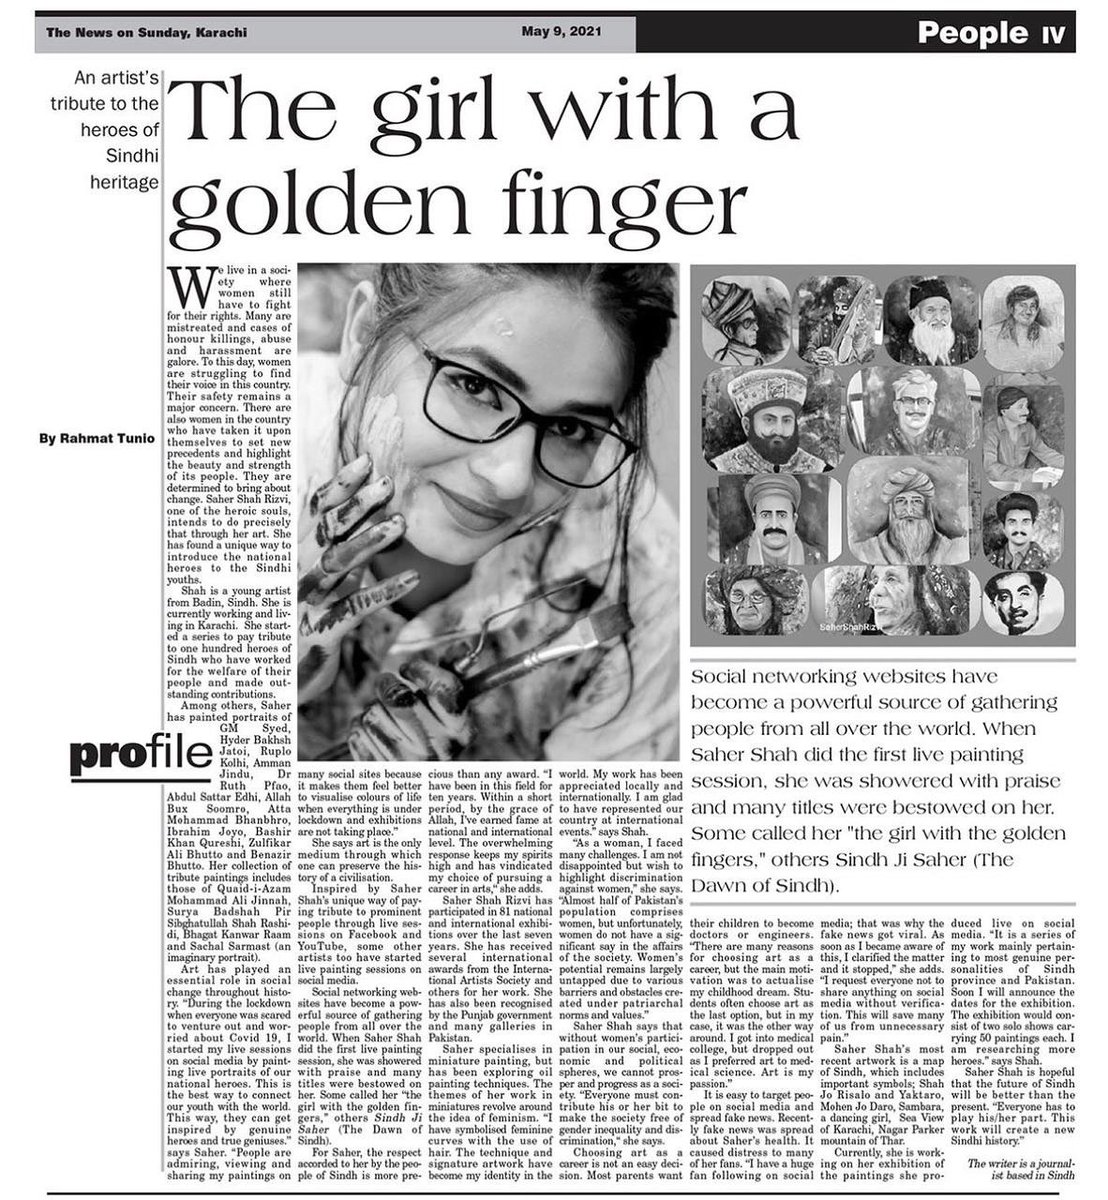 Printed edition of @SaherShahRizvi1 profile-cum interview which has been published in “The News” 💕 A newspaper of Geo network and Jang group.
#DaughterOfSindhiNation
#girlwiththegoldenfingers #سنڌ_جي_سحر #سونين_آڱرين_واري_ڇوڪري #SindhJiSaher